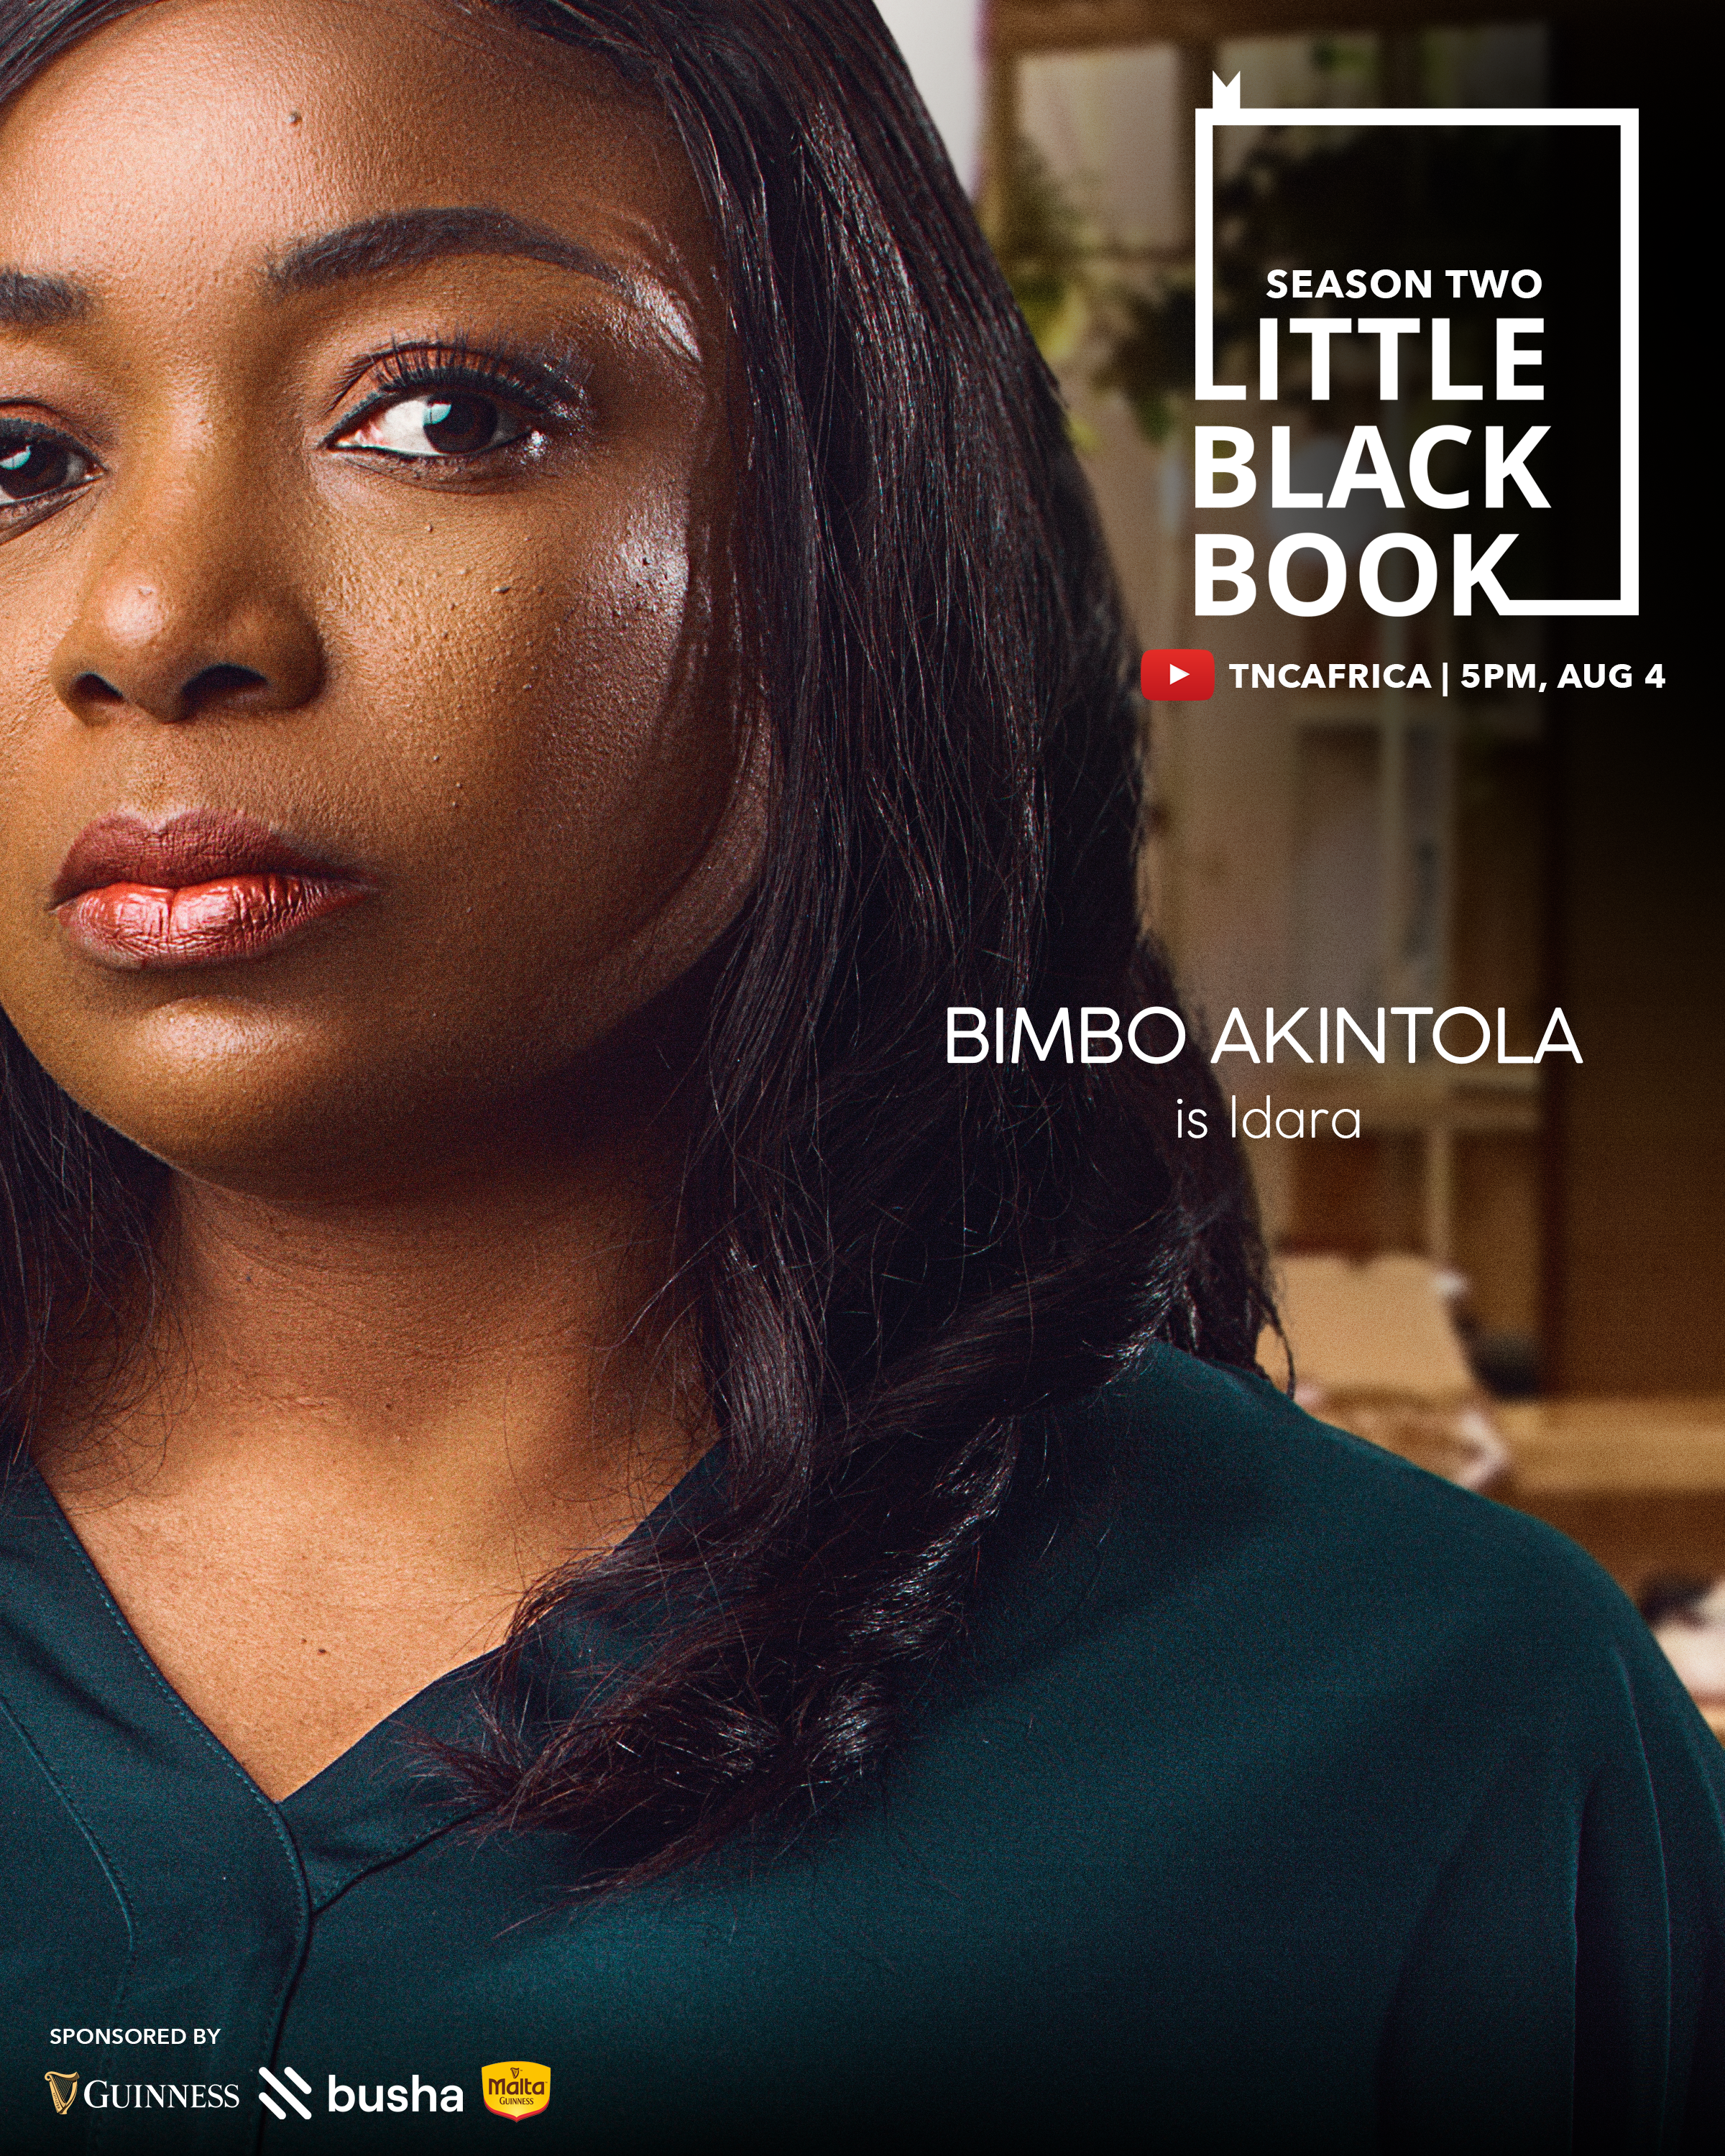 Bimbo - “Little Black Book” Returns This August 4th Unveils Character Posters Ahead of Trailer Debut